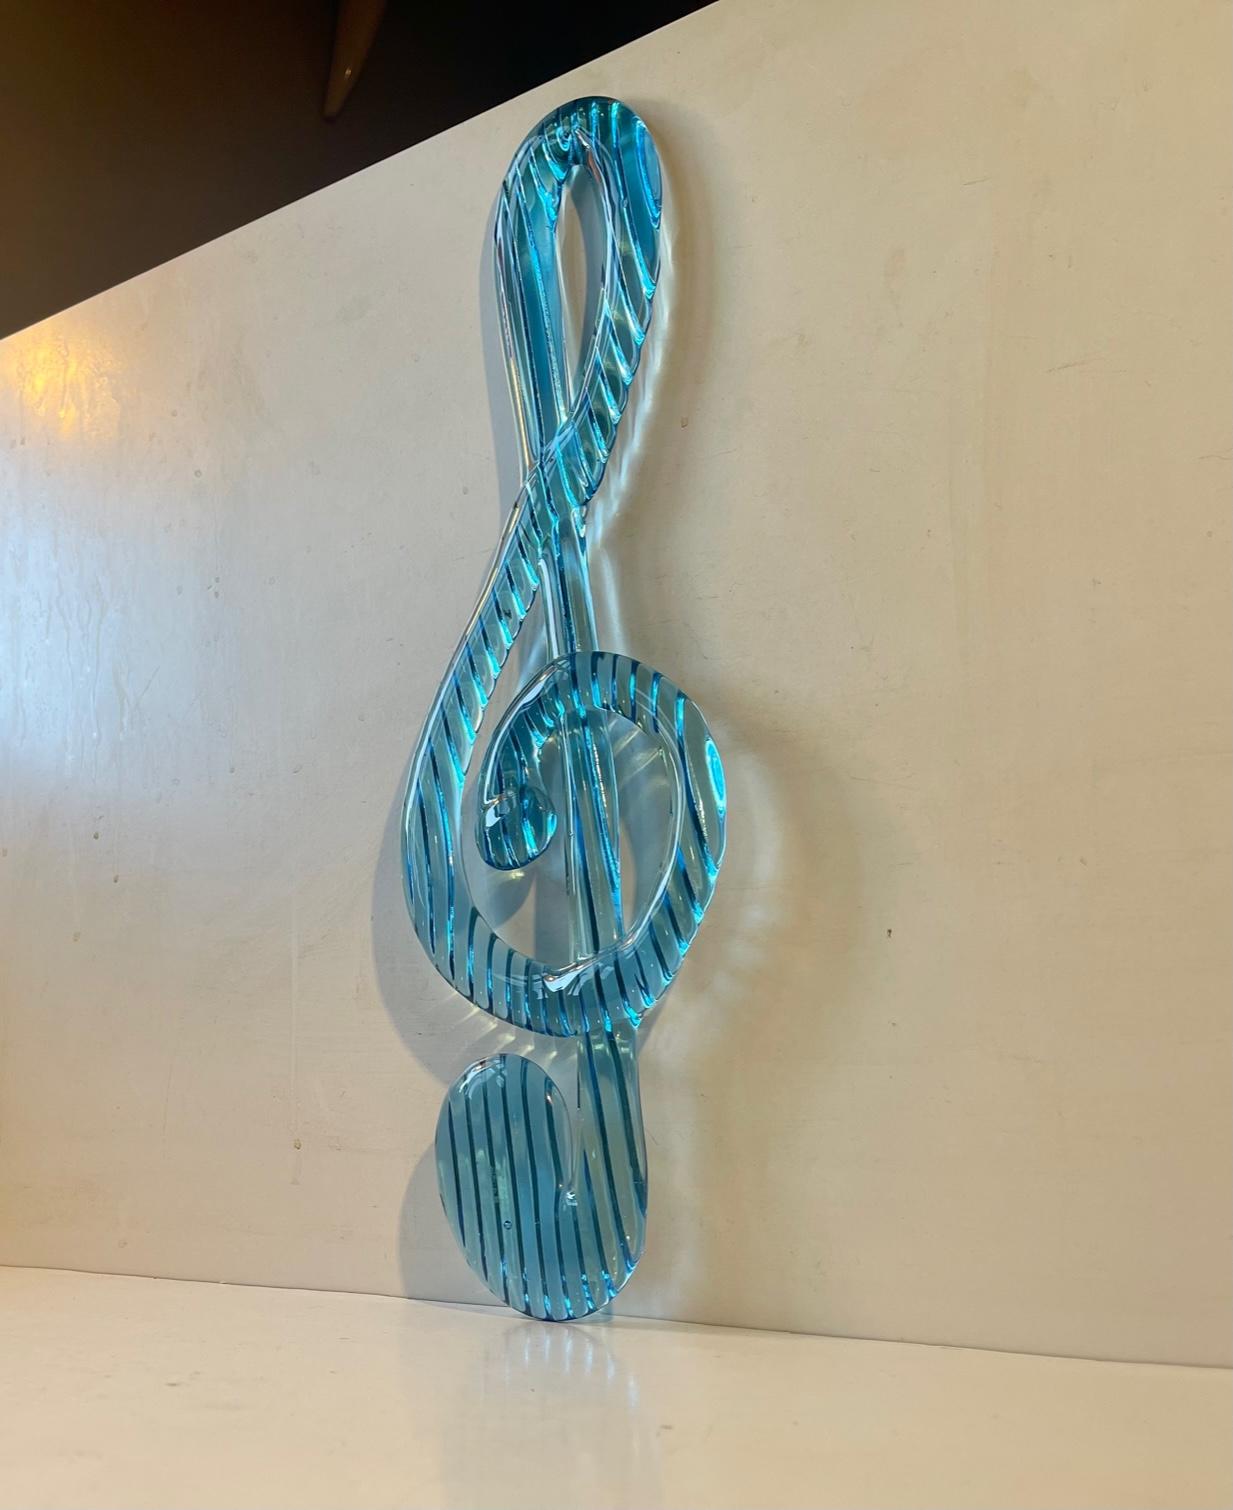 Mid-Century Modern Big G-Note Wall Sculpture in Blue Glass by Elving Conradsson for Bergdala, 1970s For Sale